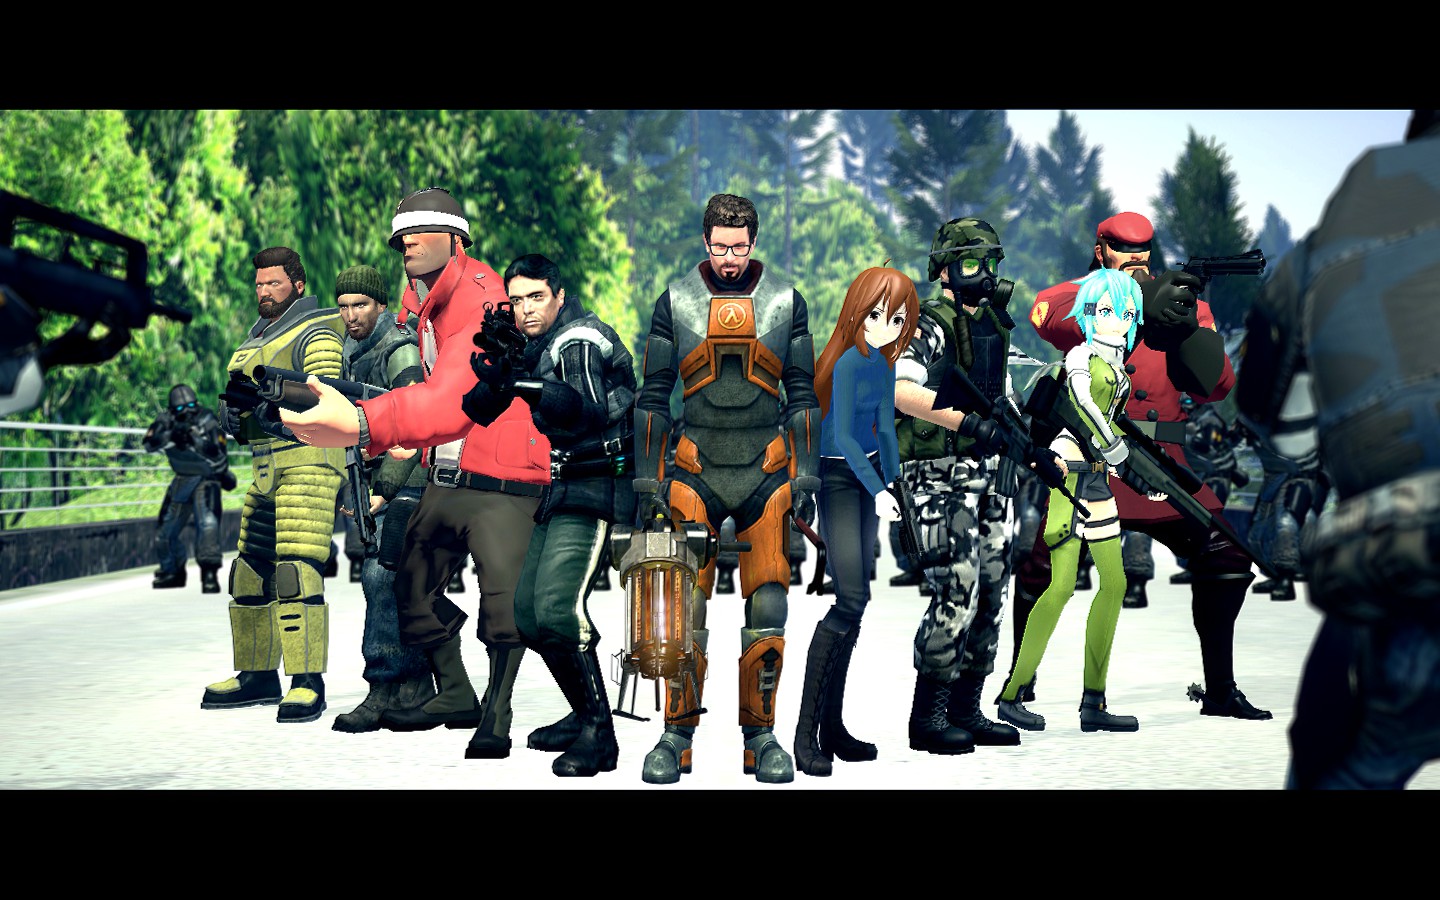 Garry's Mod Playstation2 (solo es una broma) by TreRopeArt on DeviantArt